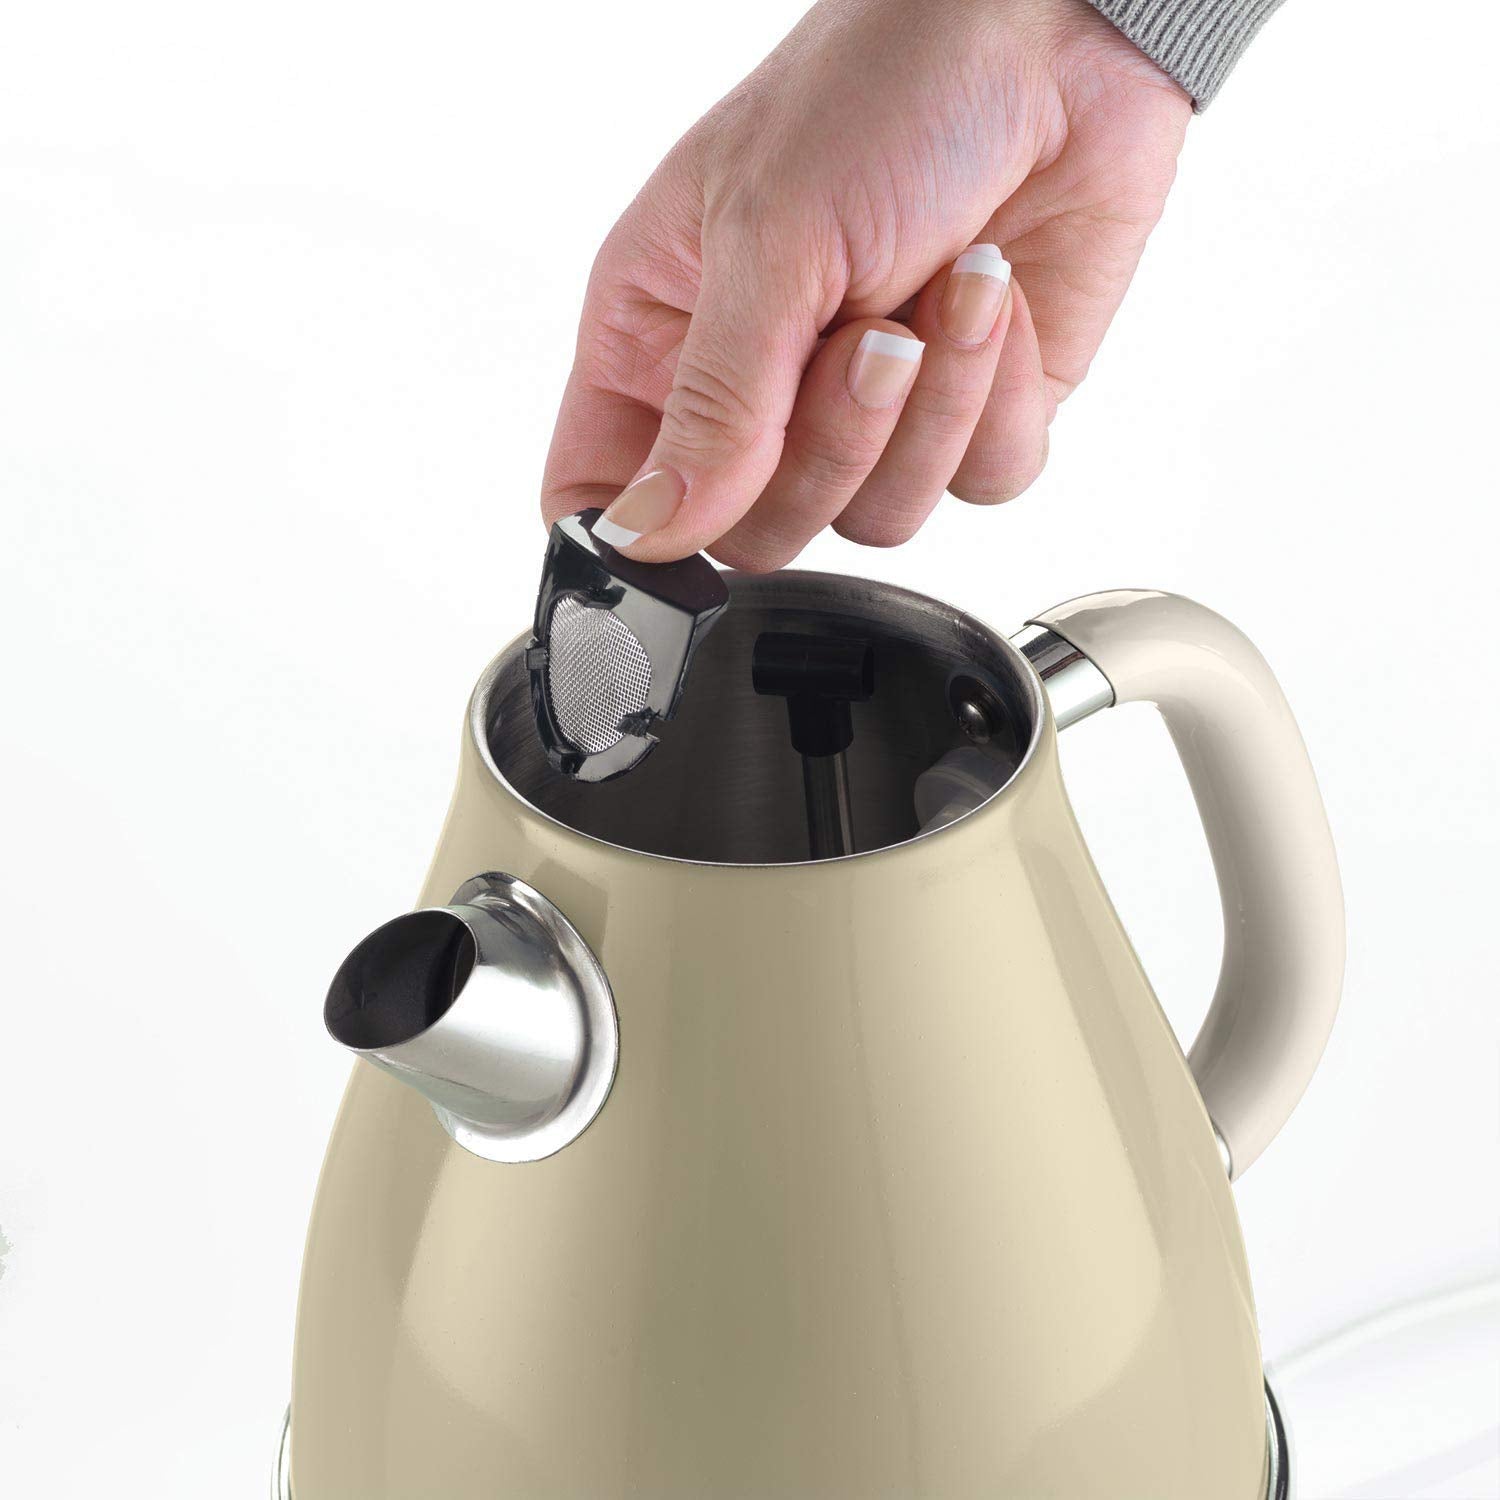 Ariete 2869 Vintage Electric Kettle, Stainless Steel, 1.7 L, Auto Switch Off, 2000 W, for Water, Tea and Herbal Teas, Pastel Beige - Mahajan Electronics Online